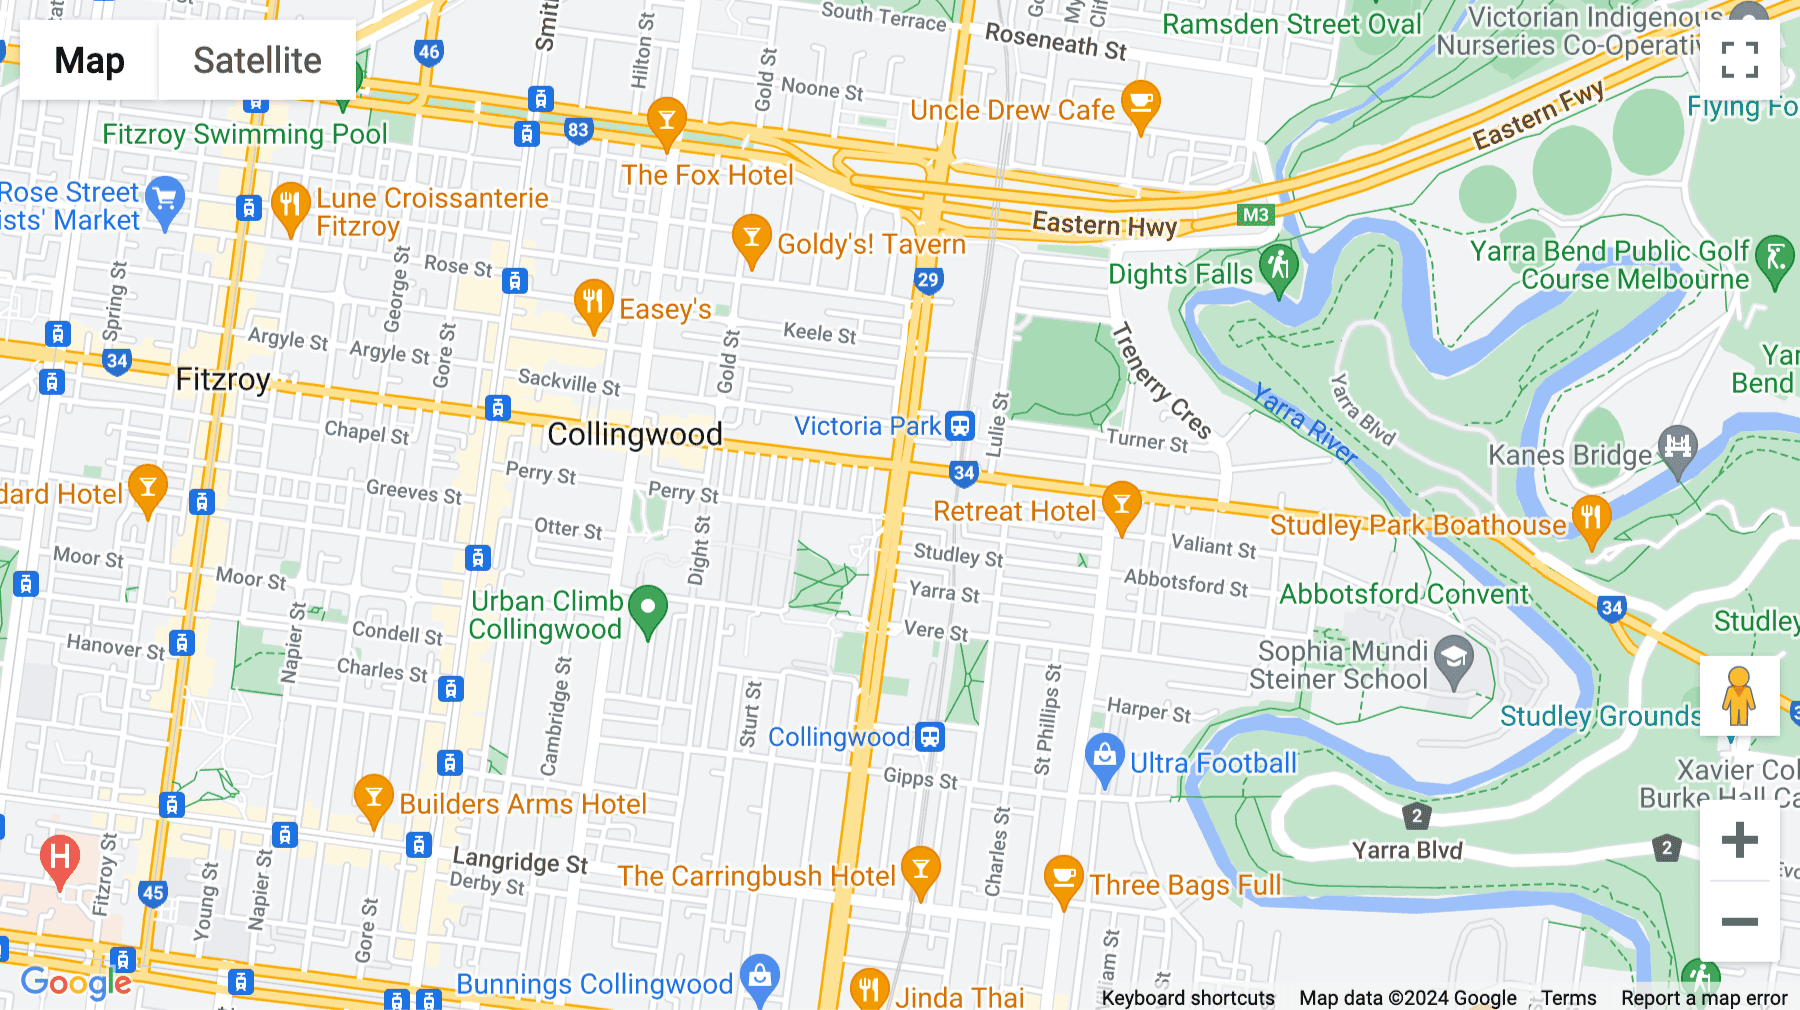 Click for interative map of 222 Hoddle Street, Melbourne